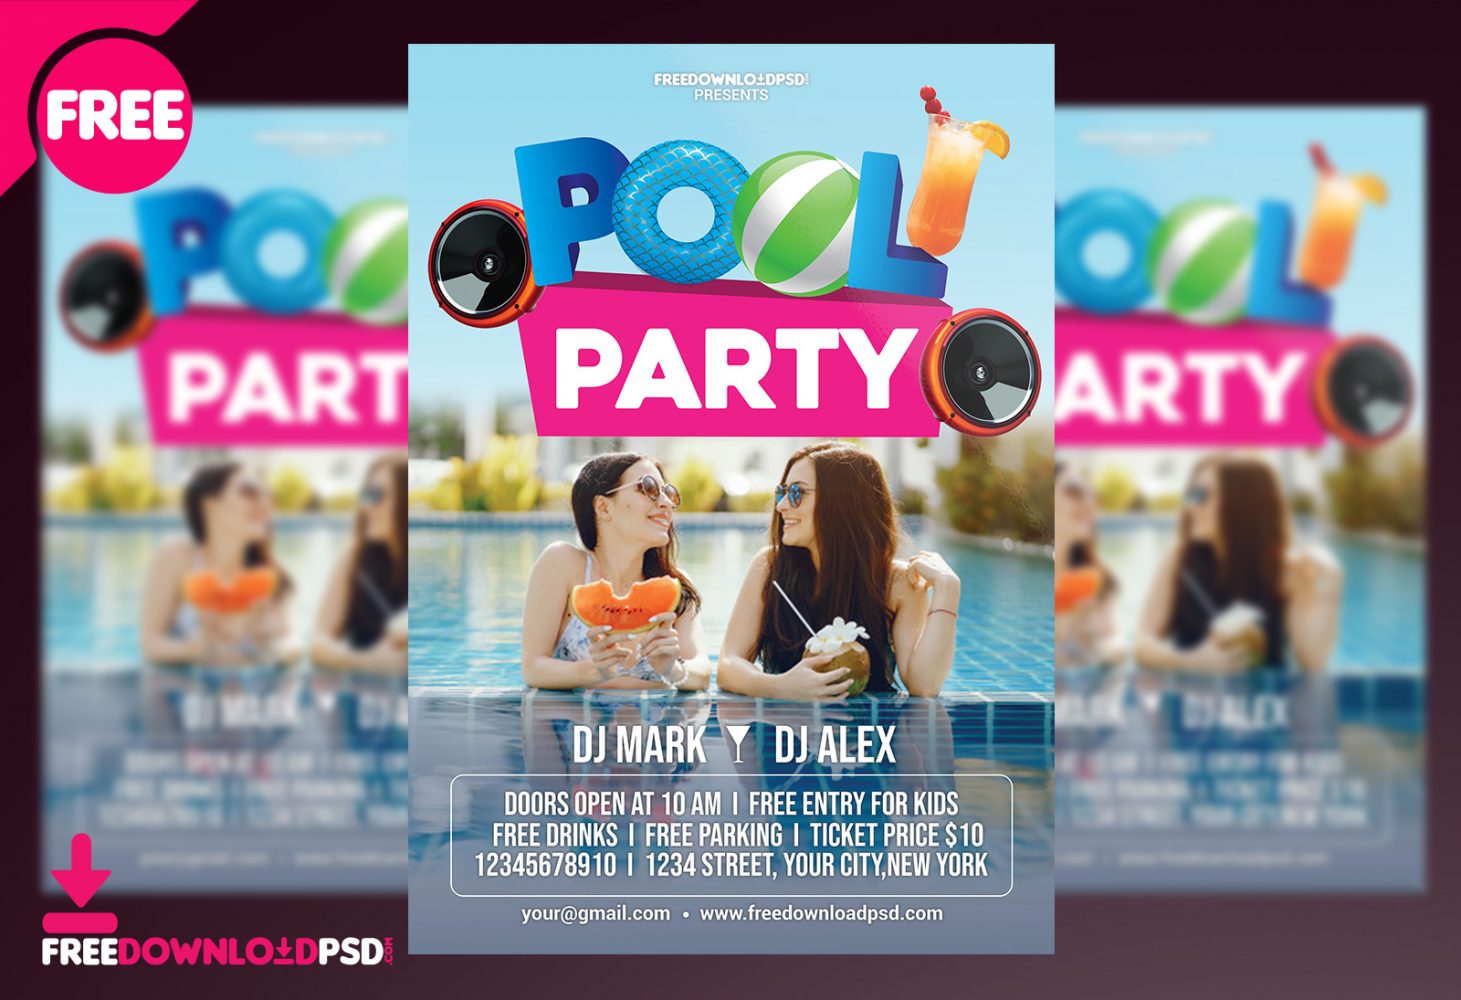 pool, pool Party, party, music, girls, enjoyment, pool party flyer, pool flyer, party flyer, flyer